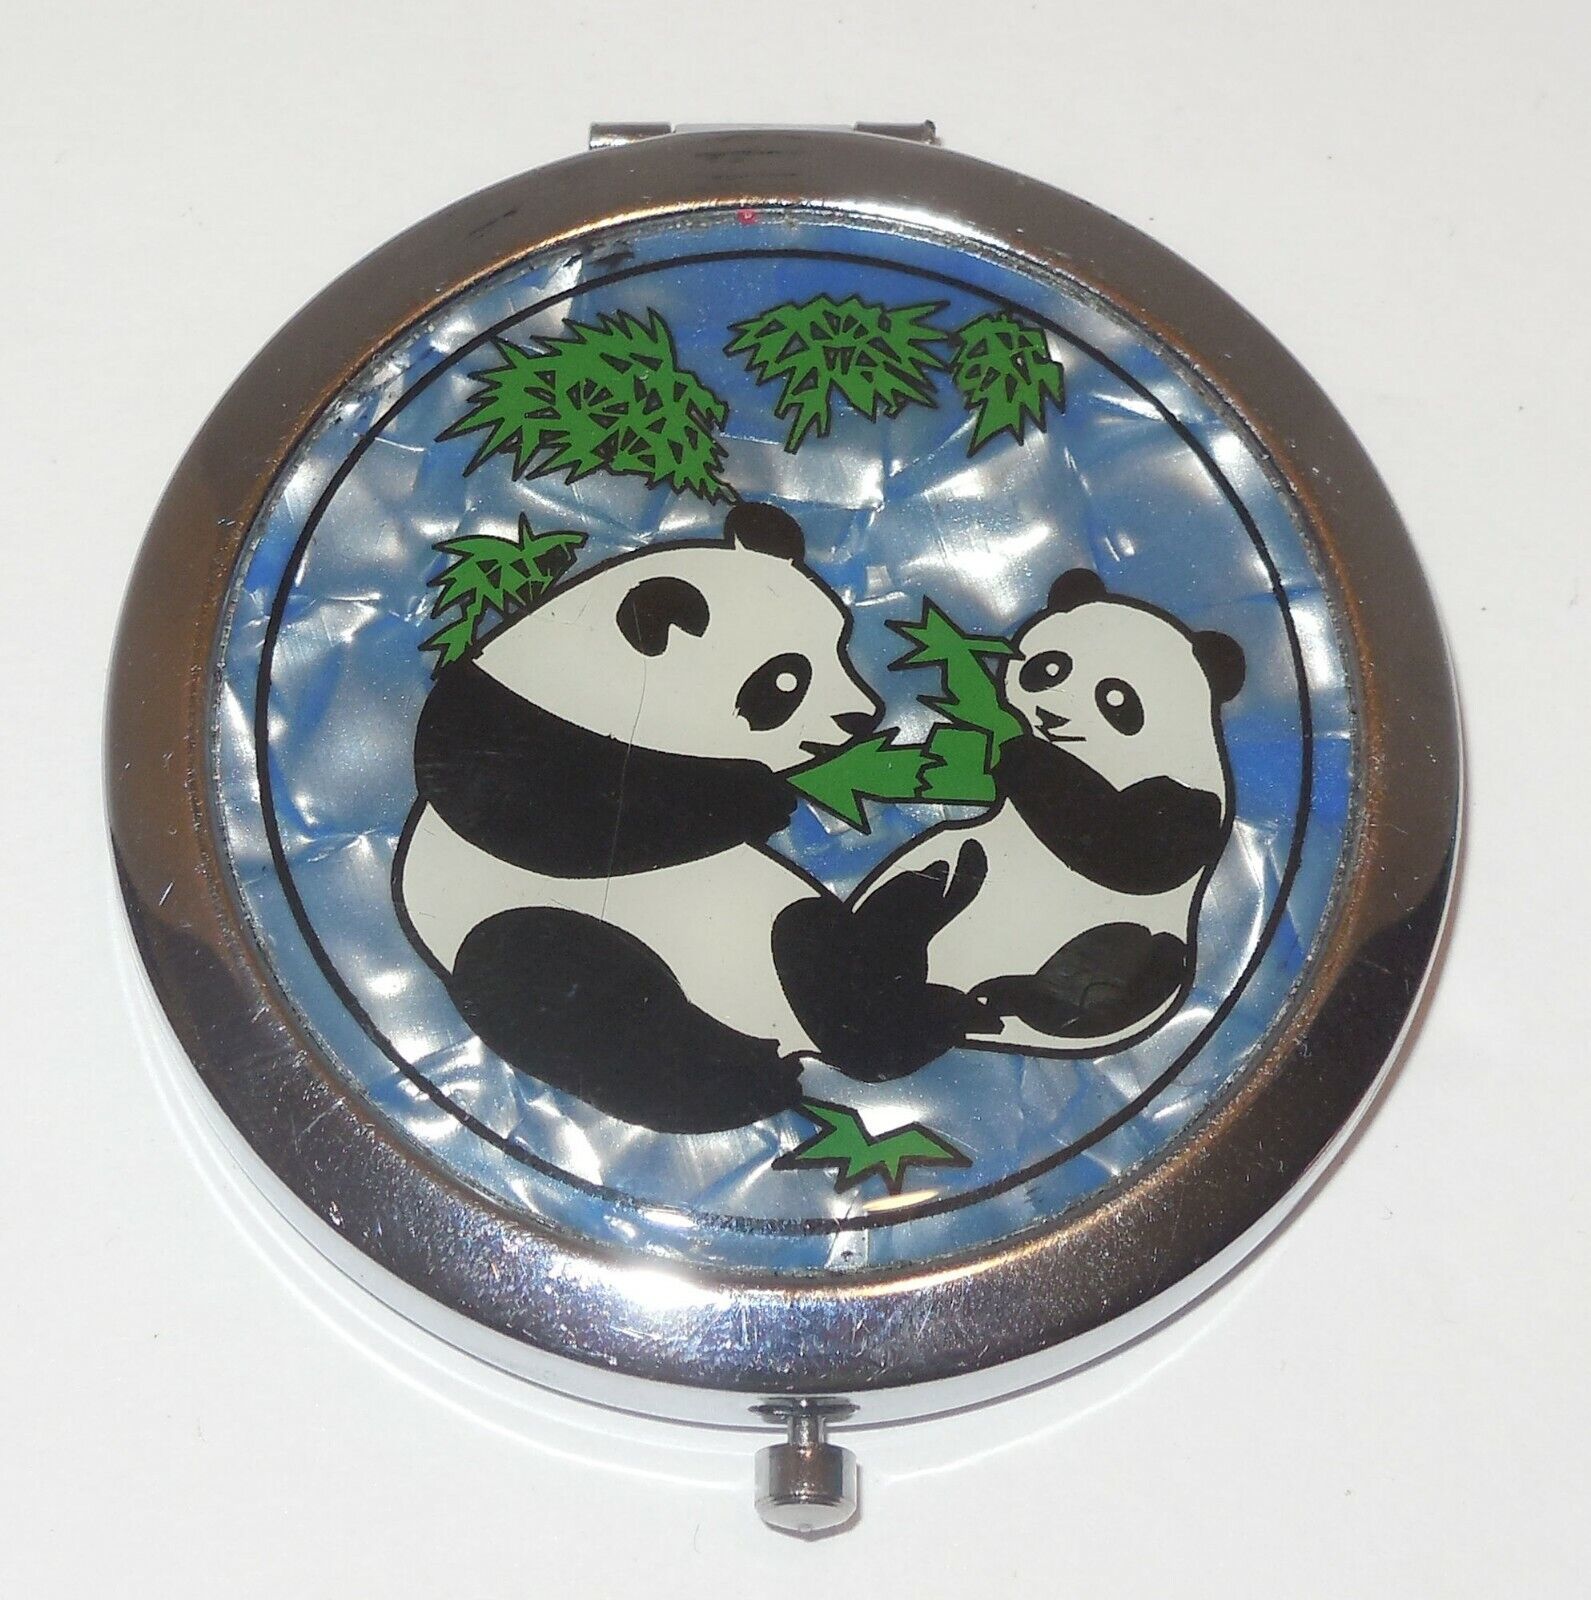 Primary image for Makeup Compact with Panda Bear Design